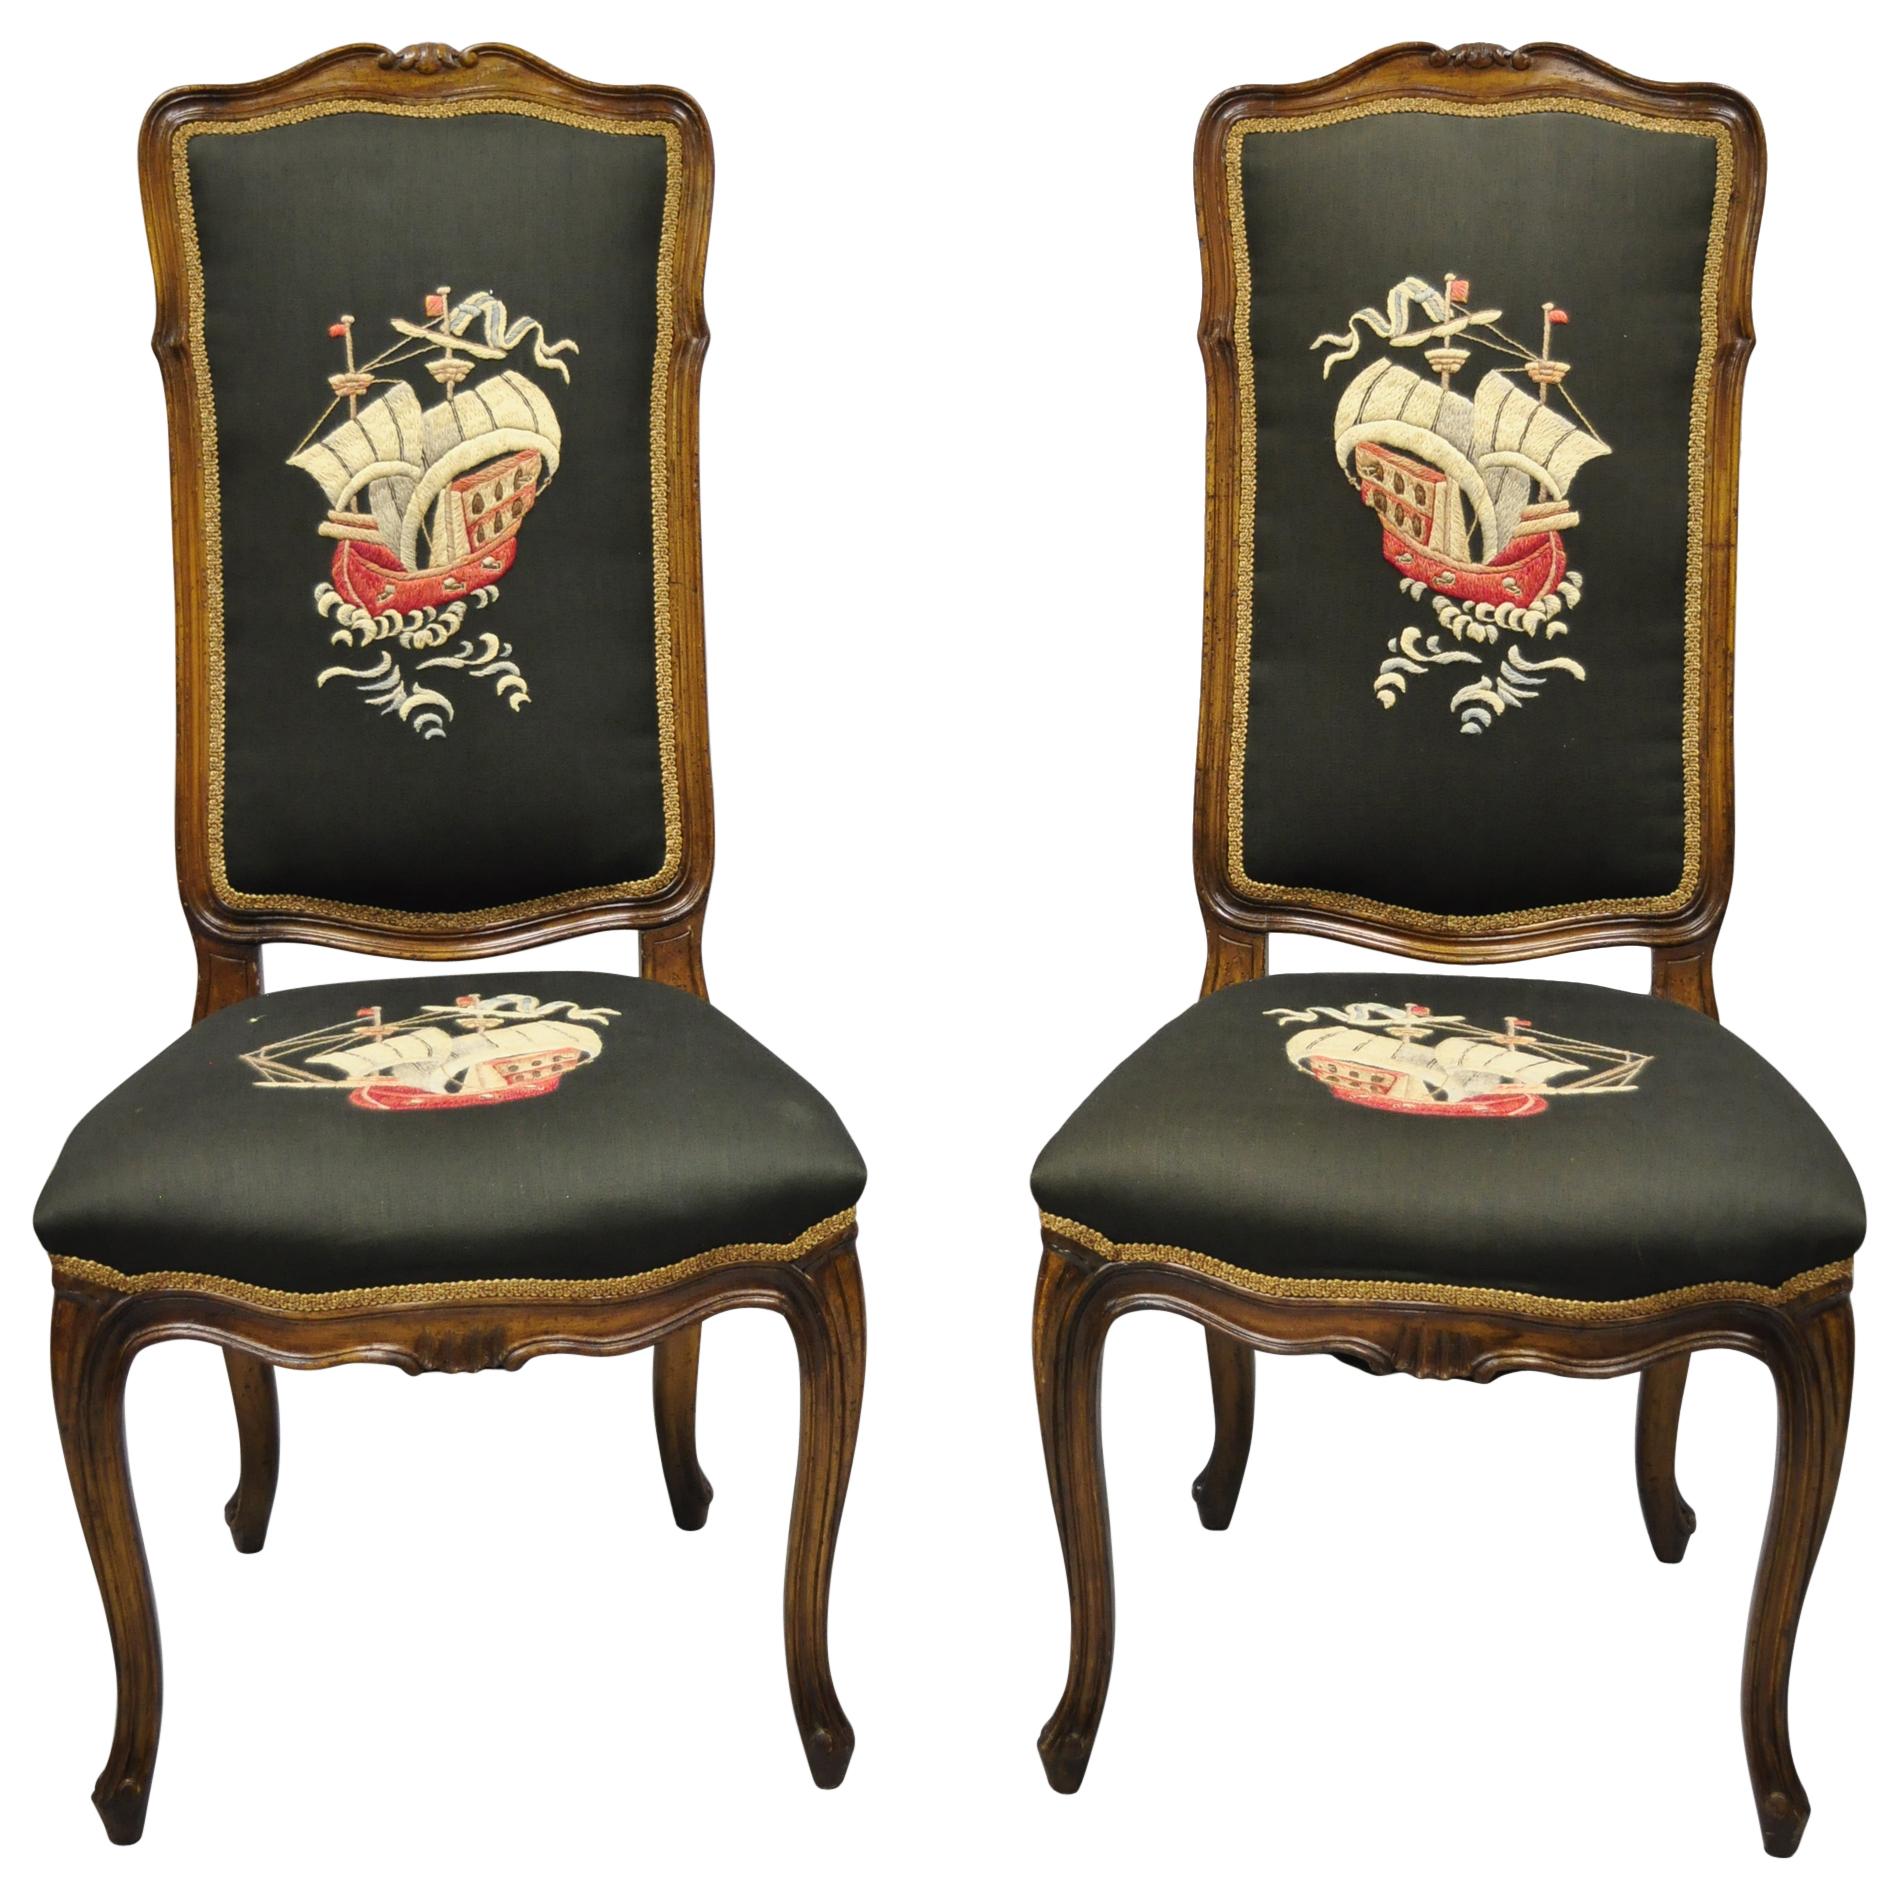 French Provincial Louis XV Walnut Side Chairs w/ Ship Boat Crewel Work, a Pair For Sale